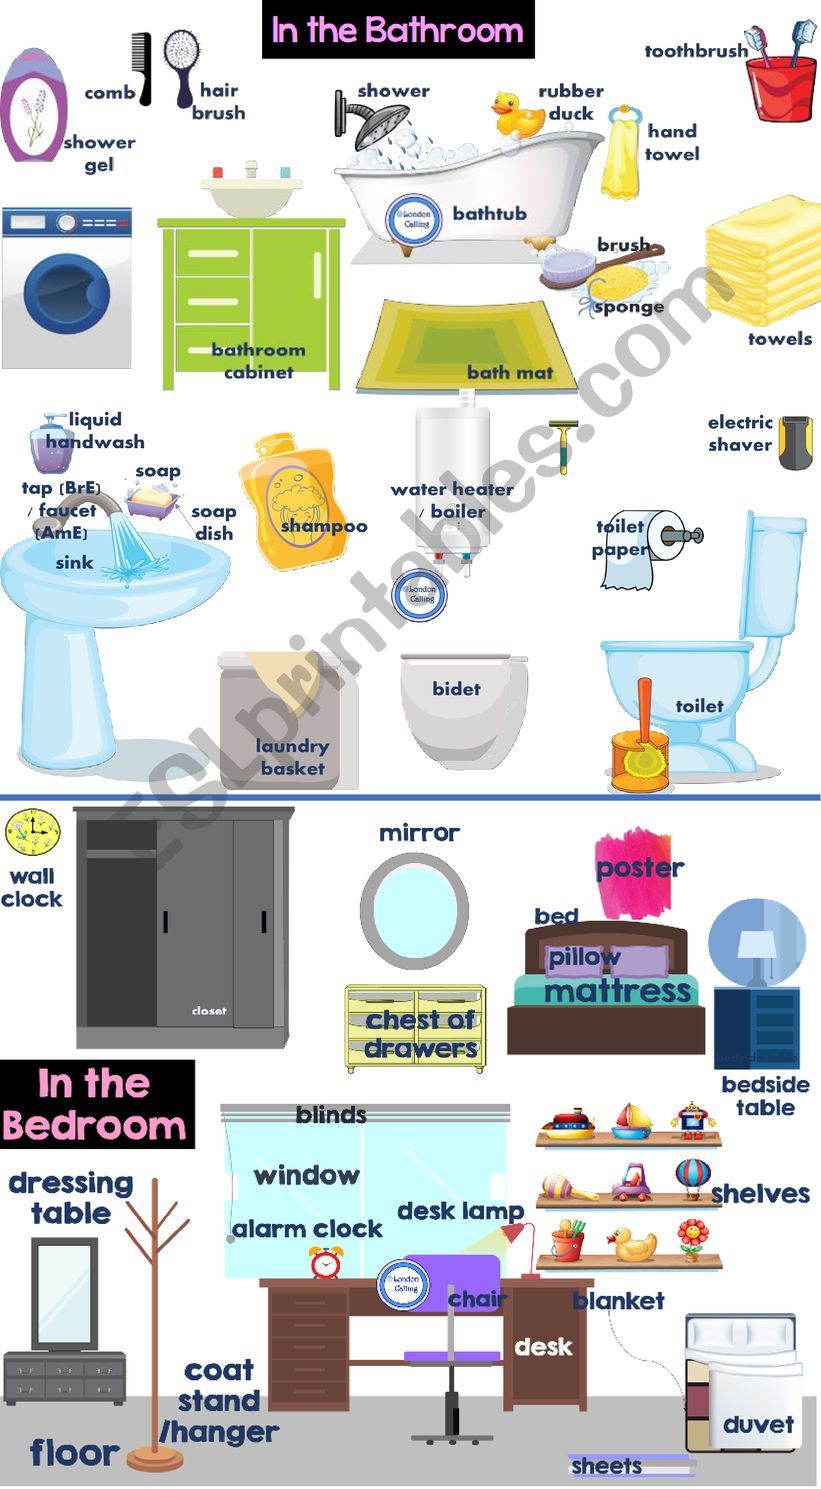 in-the-bedroom-and-in-the-bathroom-vocabulary-esl-worksheet-by-dackala